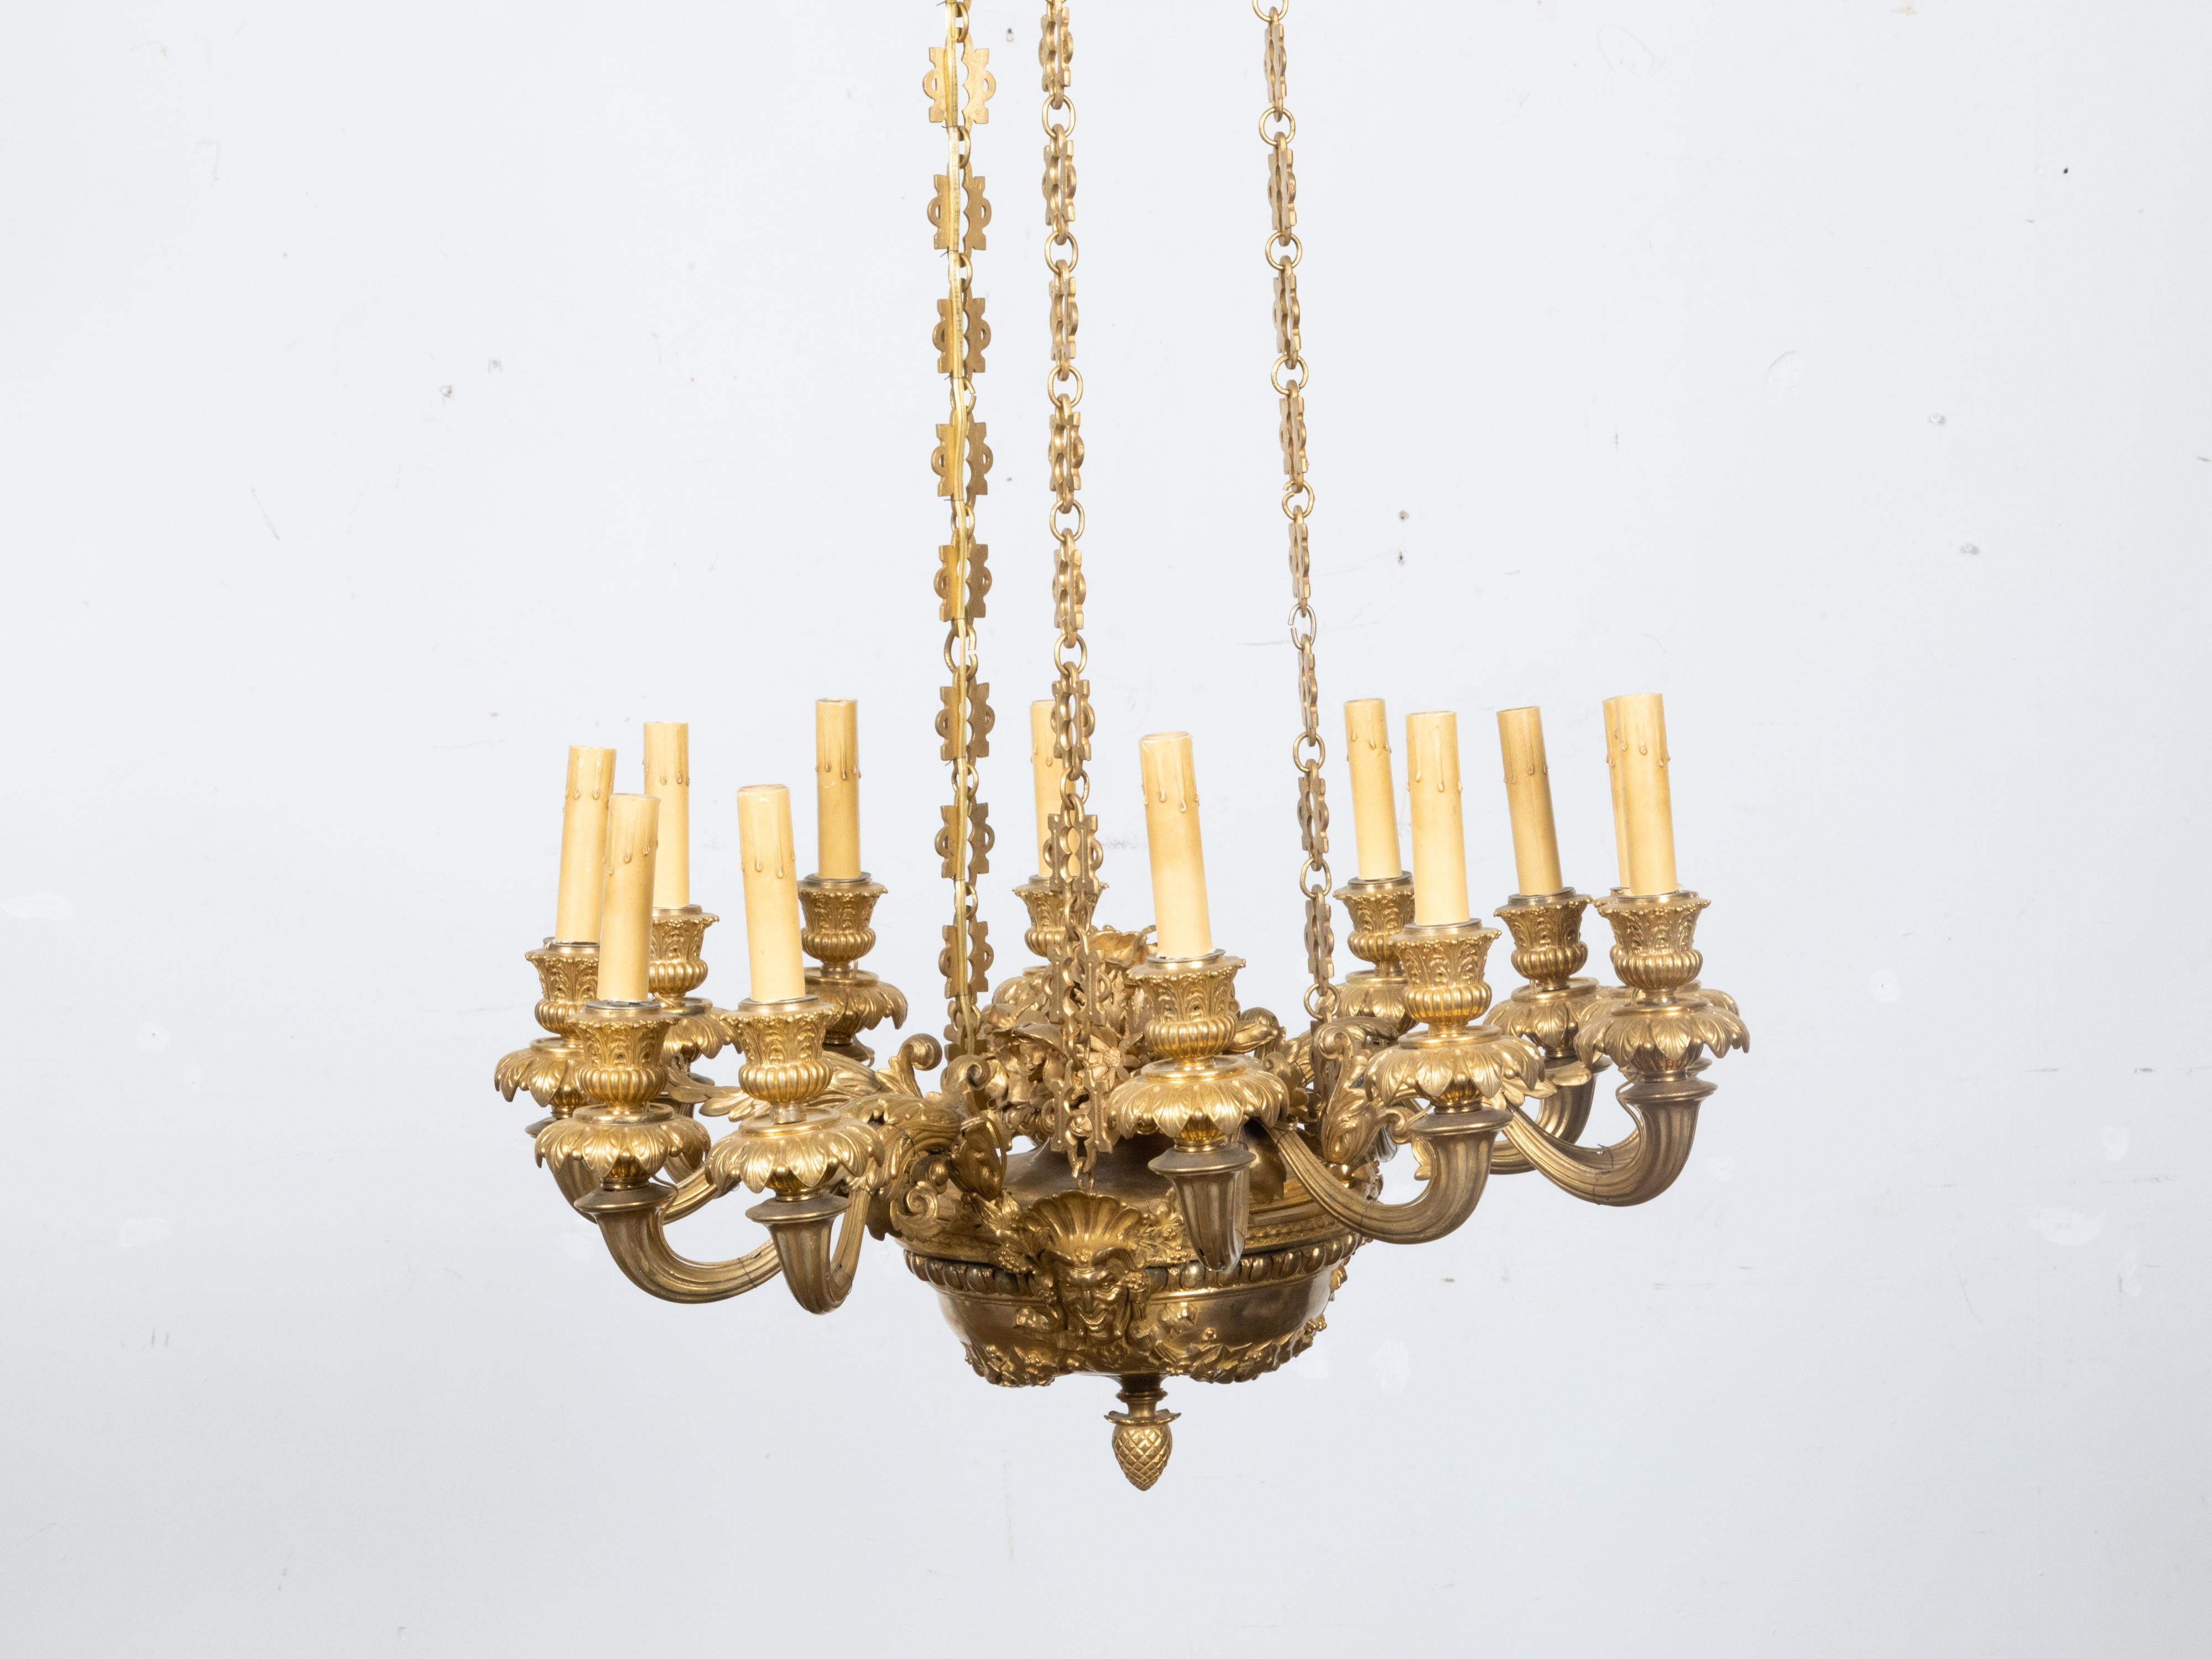 French Napoléon III 19th Century Gilt Bronze 12 Light Chandelier with Mascarons For Sale 1